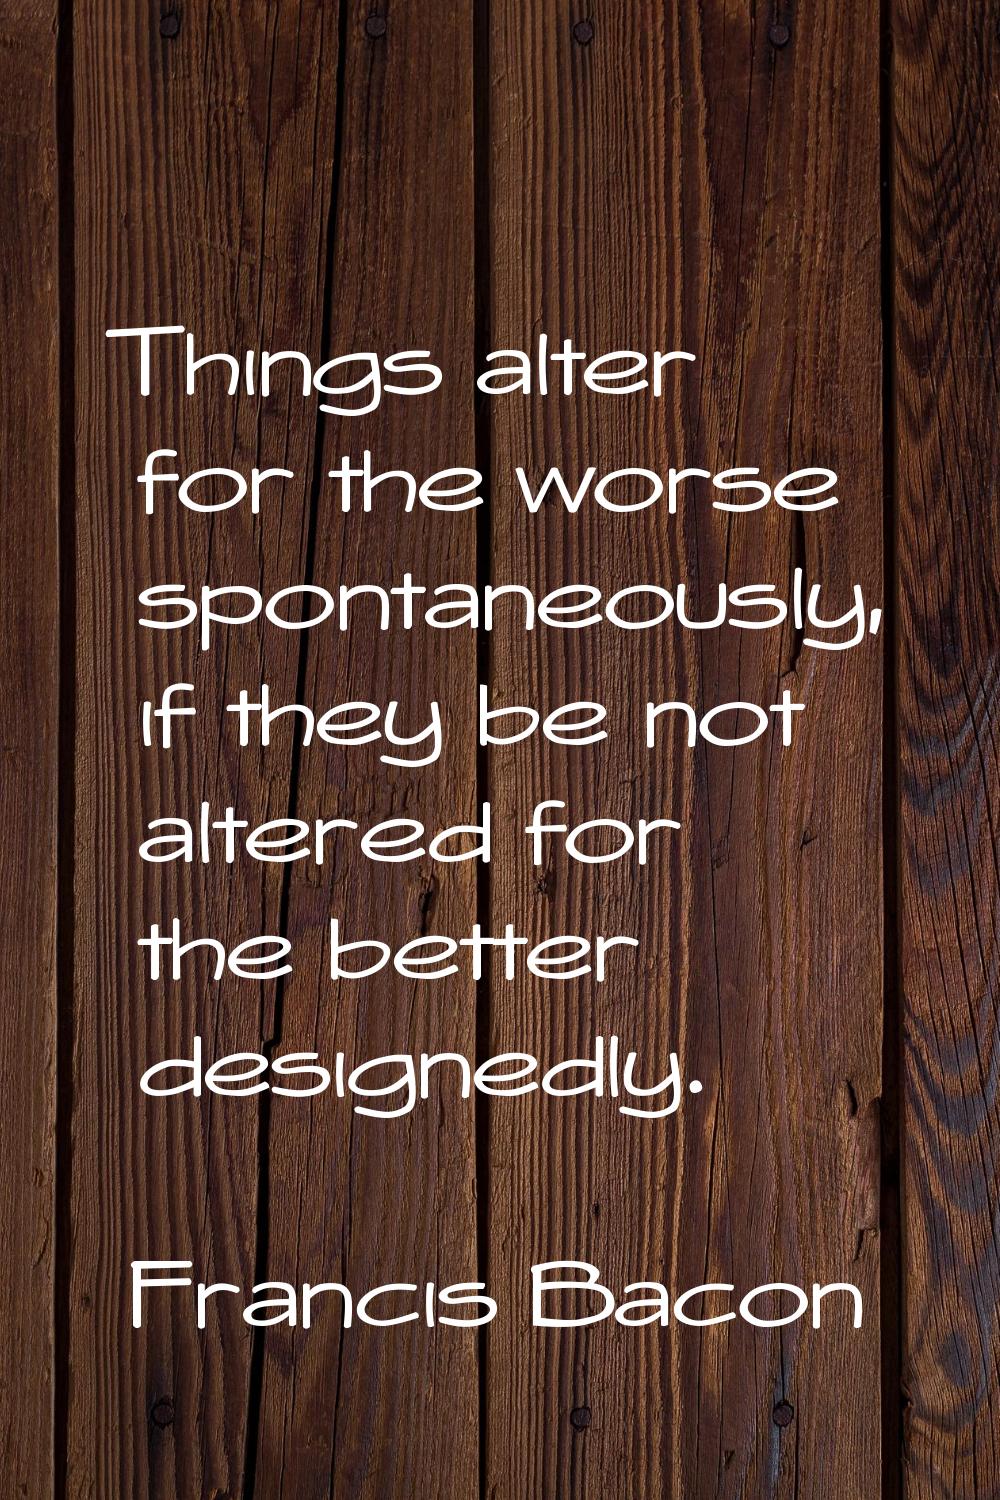 Things alter for the worse spontaneously, if they be not altered for the better designedly.